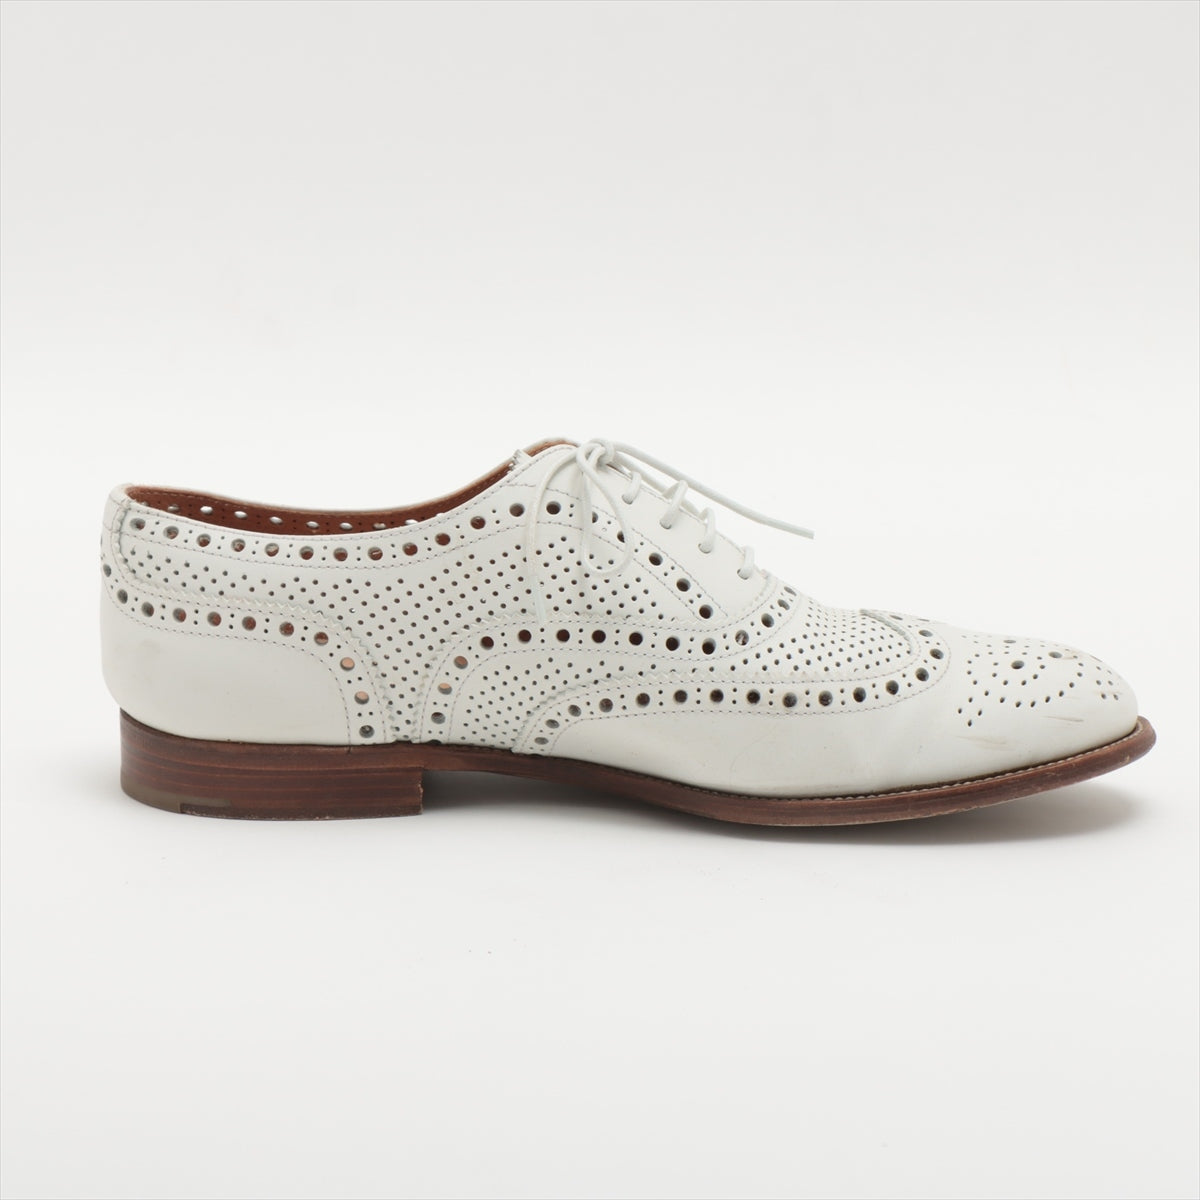 Church's Burwood Leather Leather shoes 36 1/2 Ladies' White punching